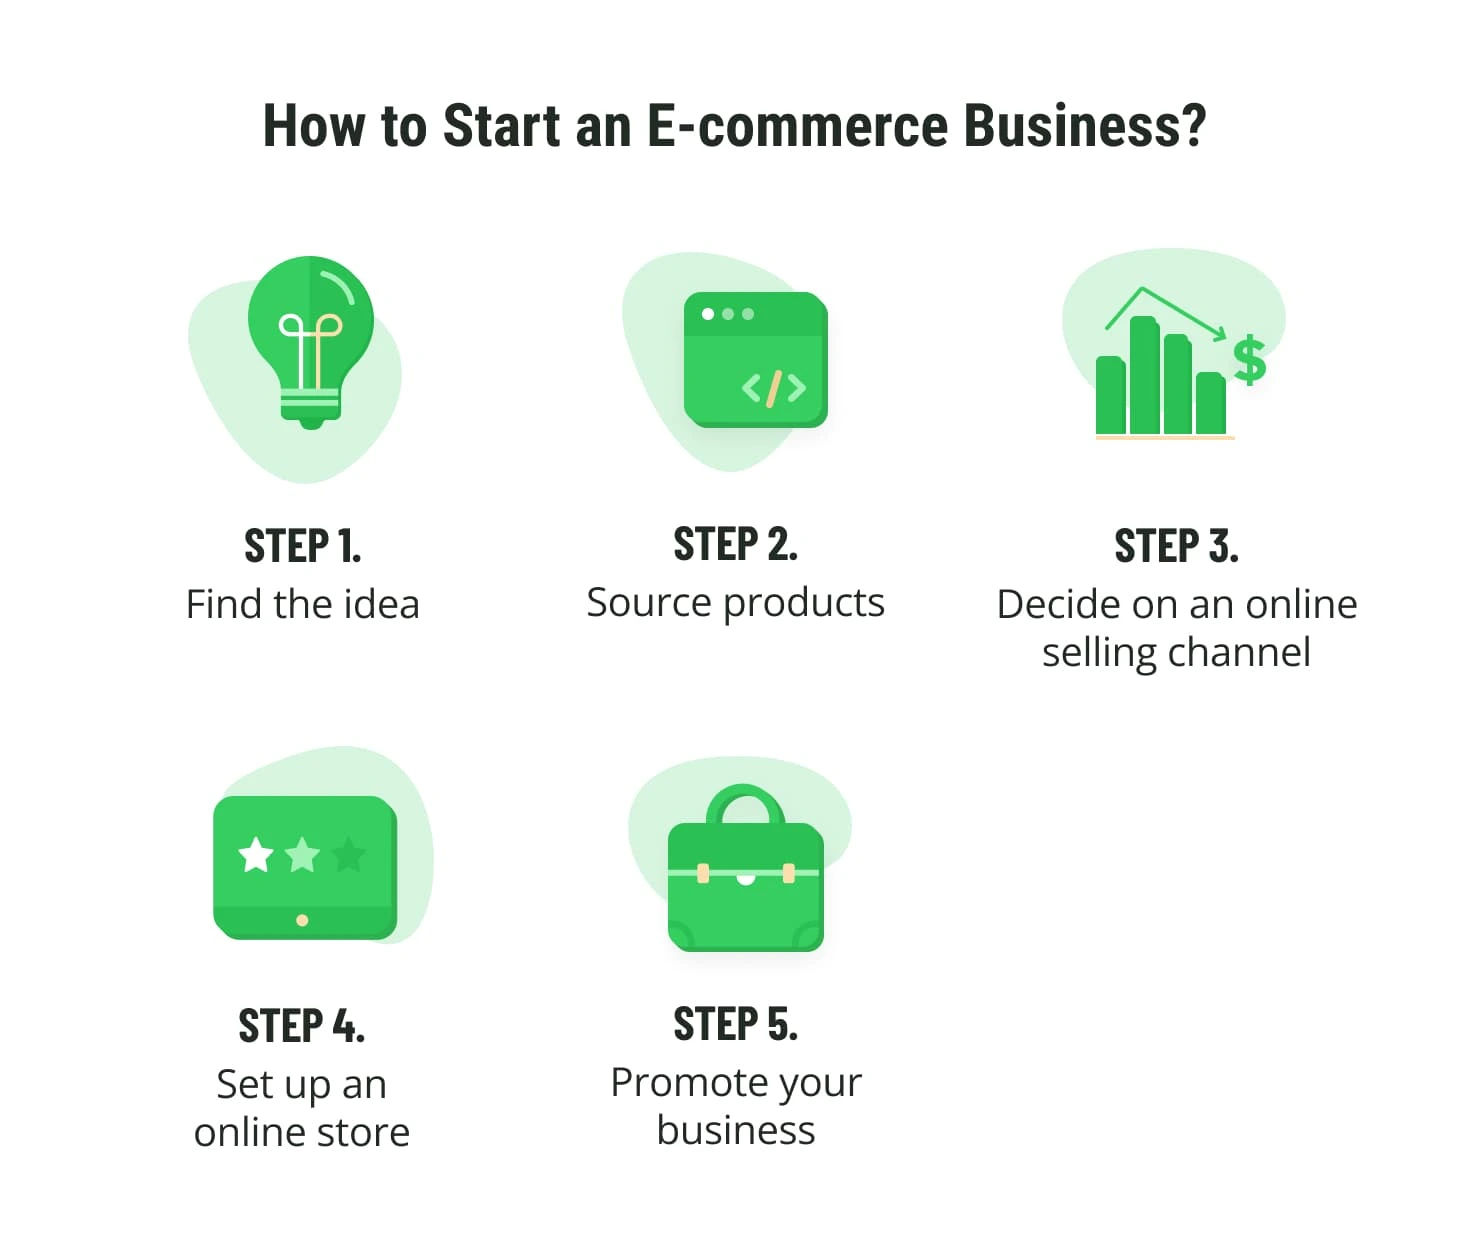 How to start an E-commerce business